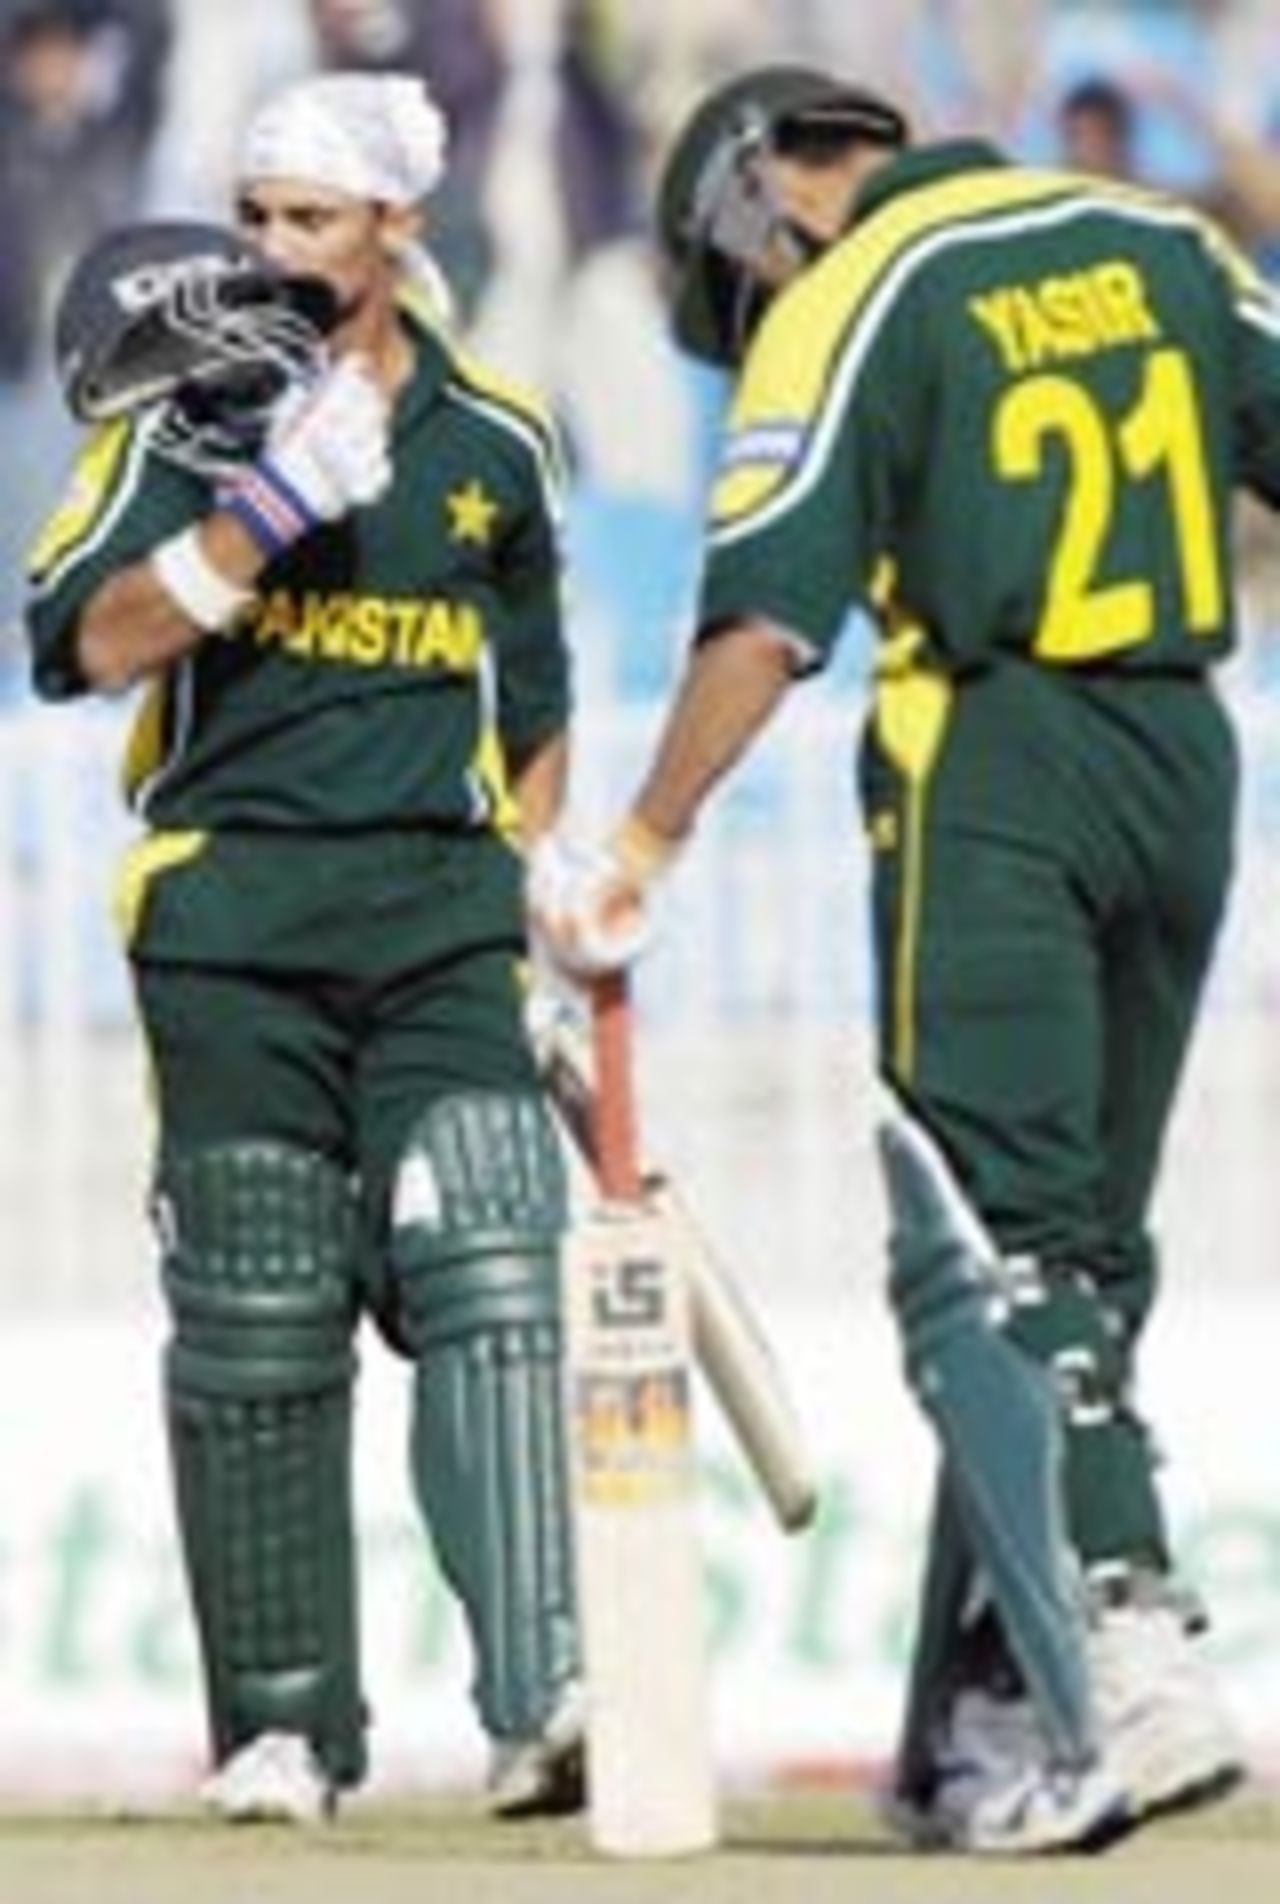 Pakistani batsman Imran Farhat (L) kisses his helmet as his mate Yasir Hameed moves forward to congratulate him after he completed a century during the final One Day International (ODI) cricket match between Pakistan and New Zealand in Rawalpindi, 07 December 2003.